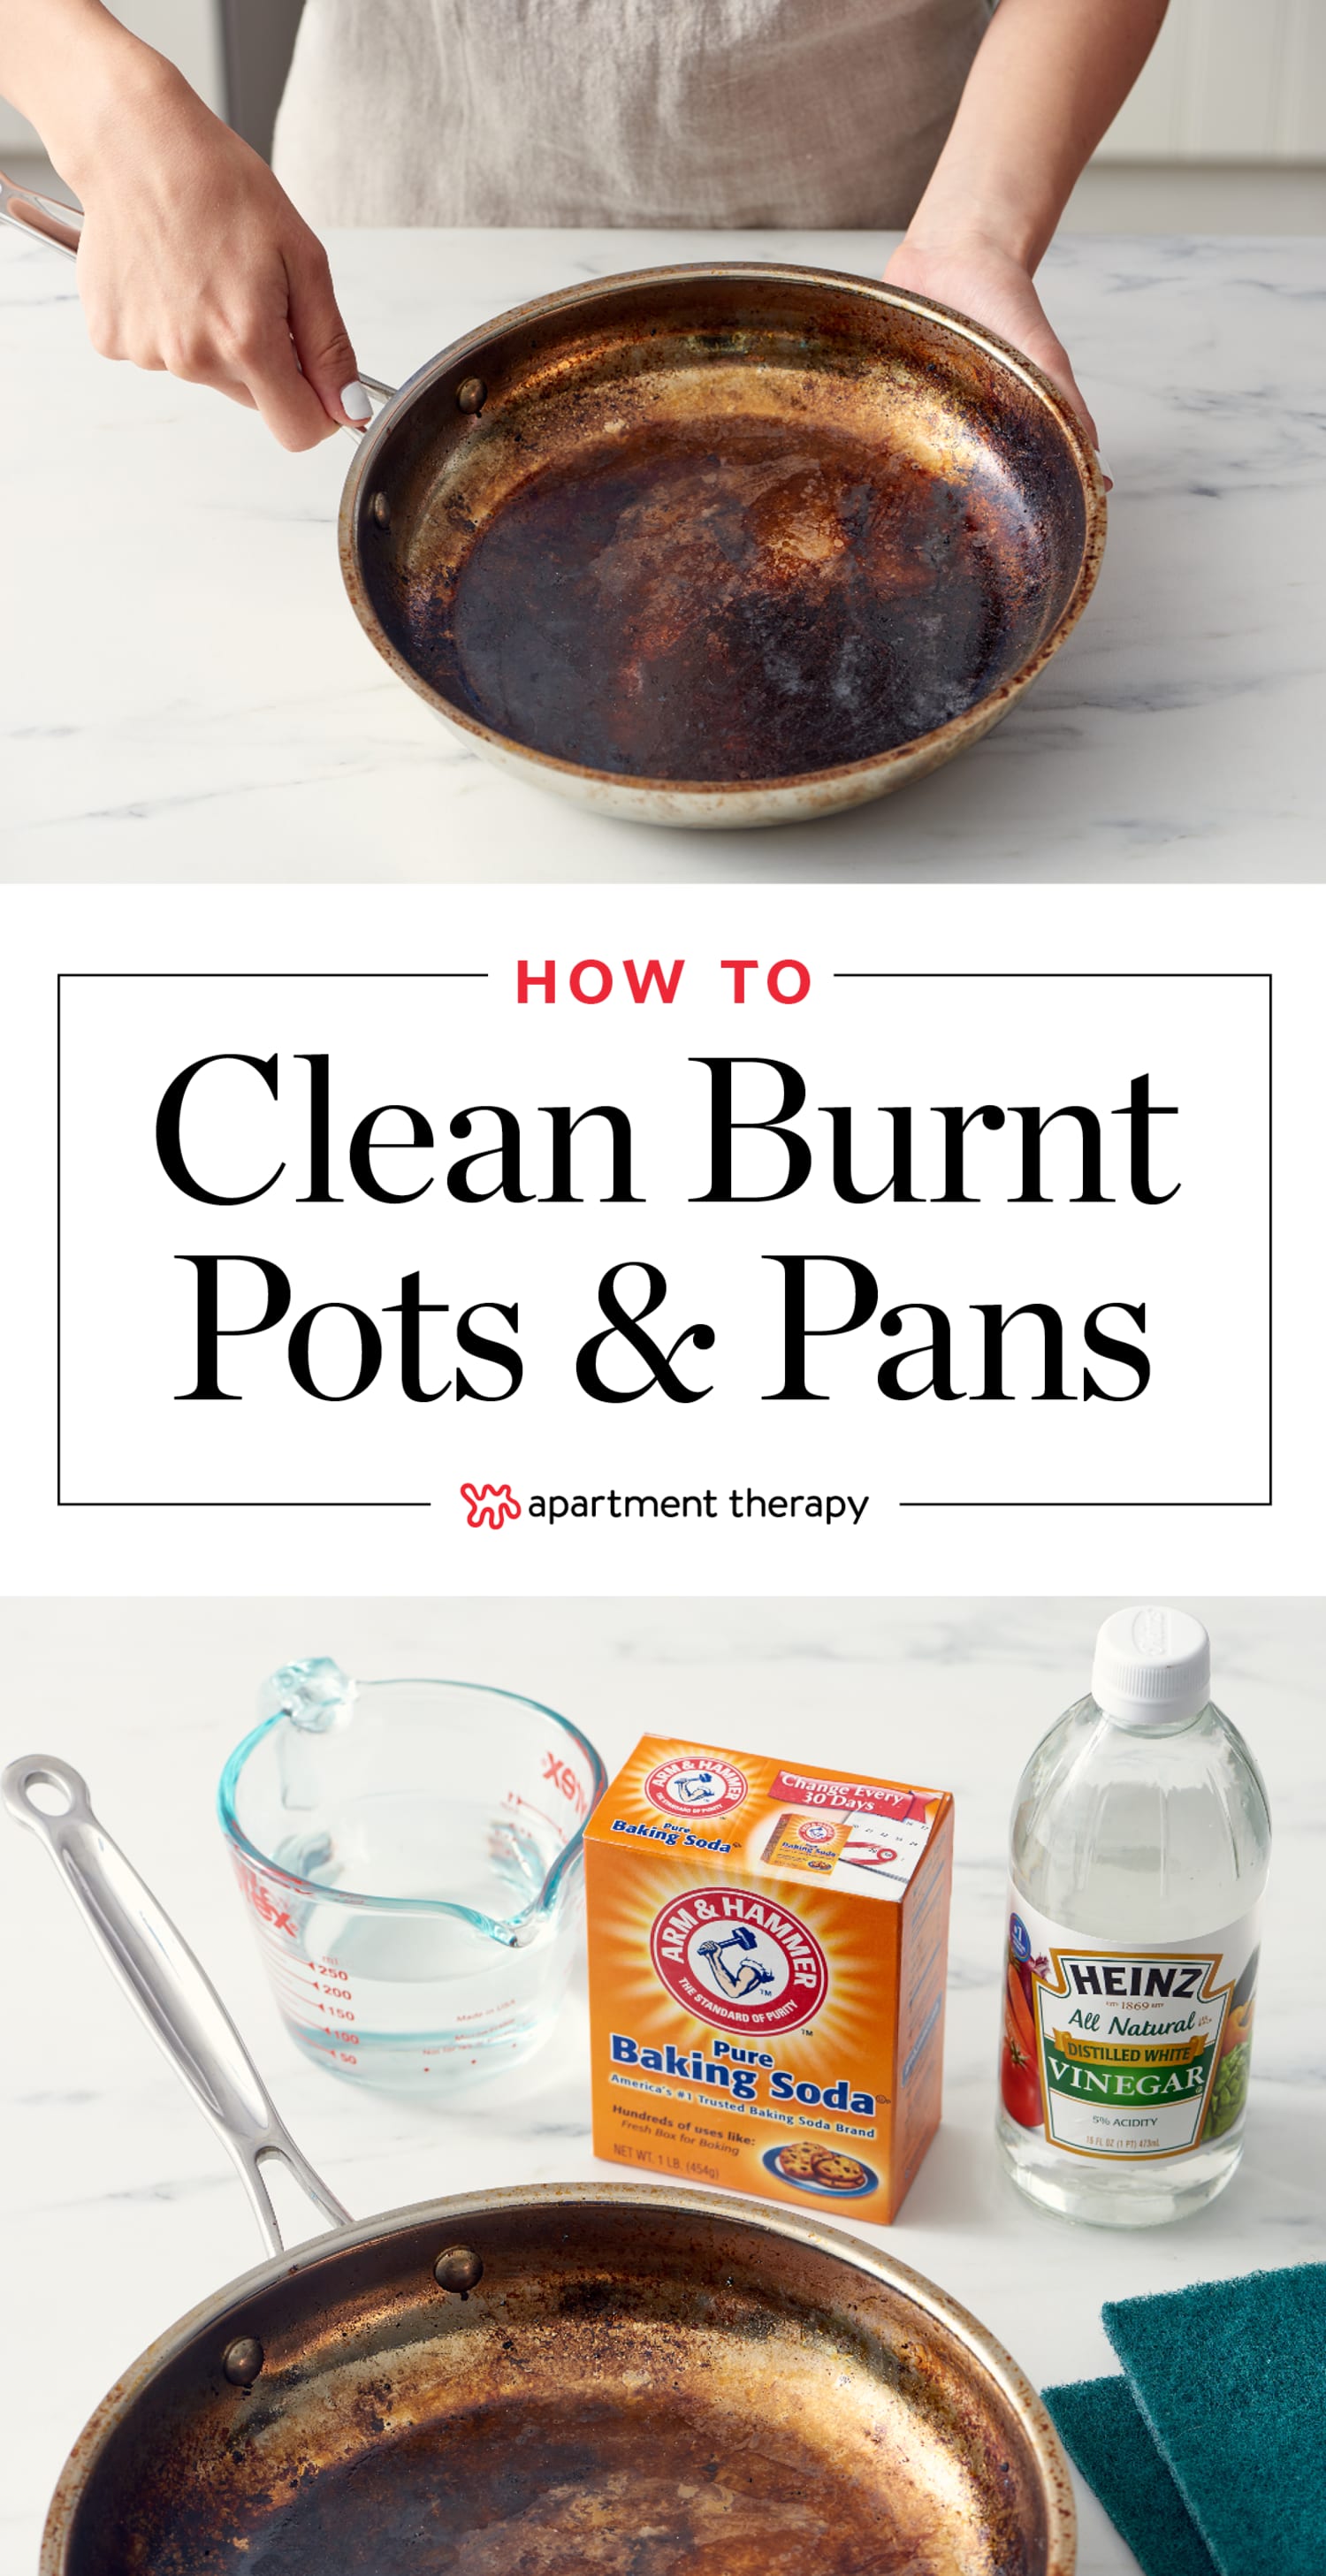 How To Clean A Scorched Pot - www.inf-inet.com